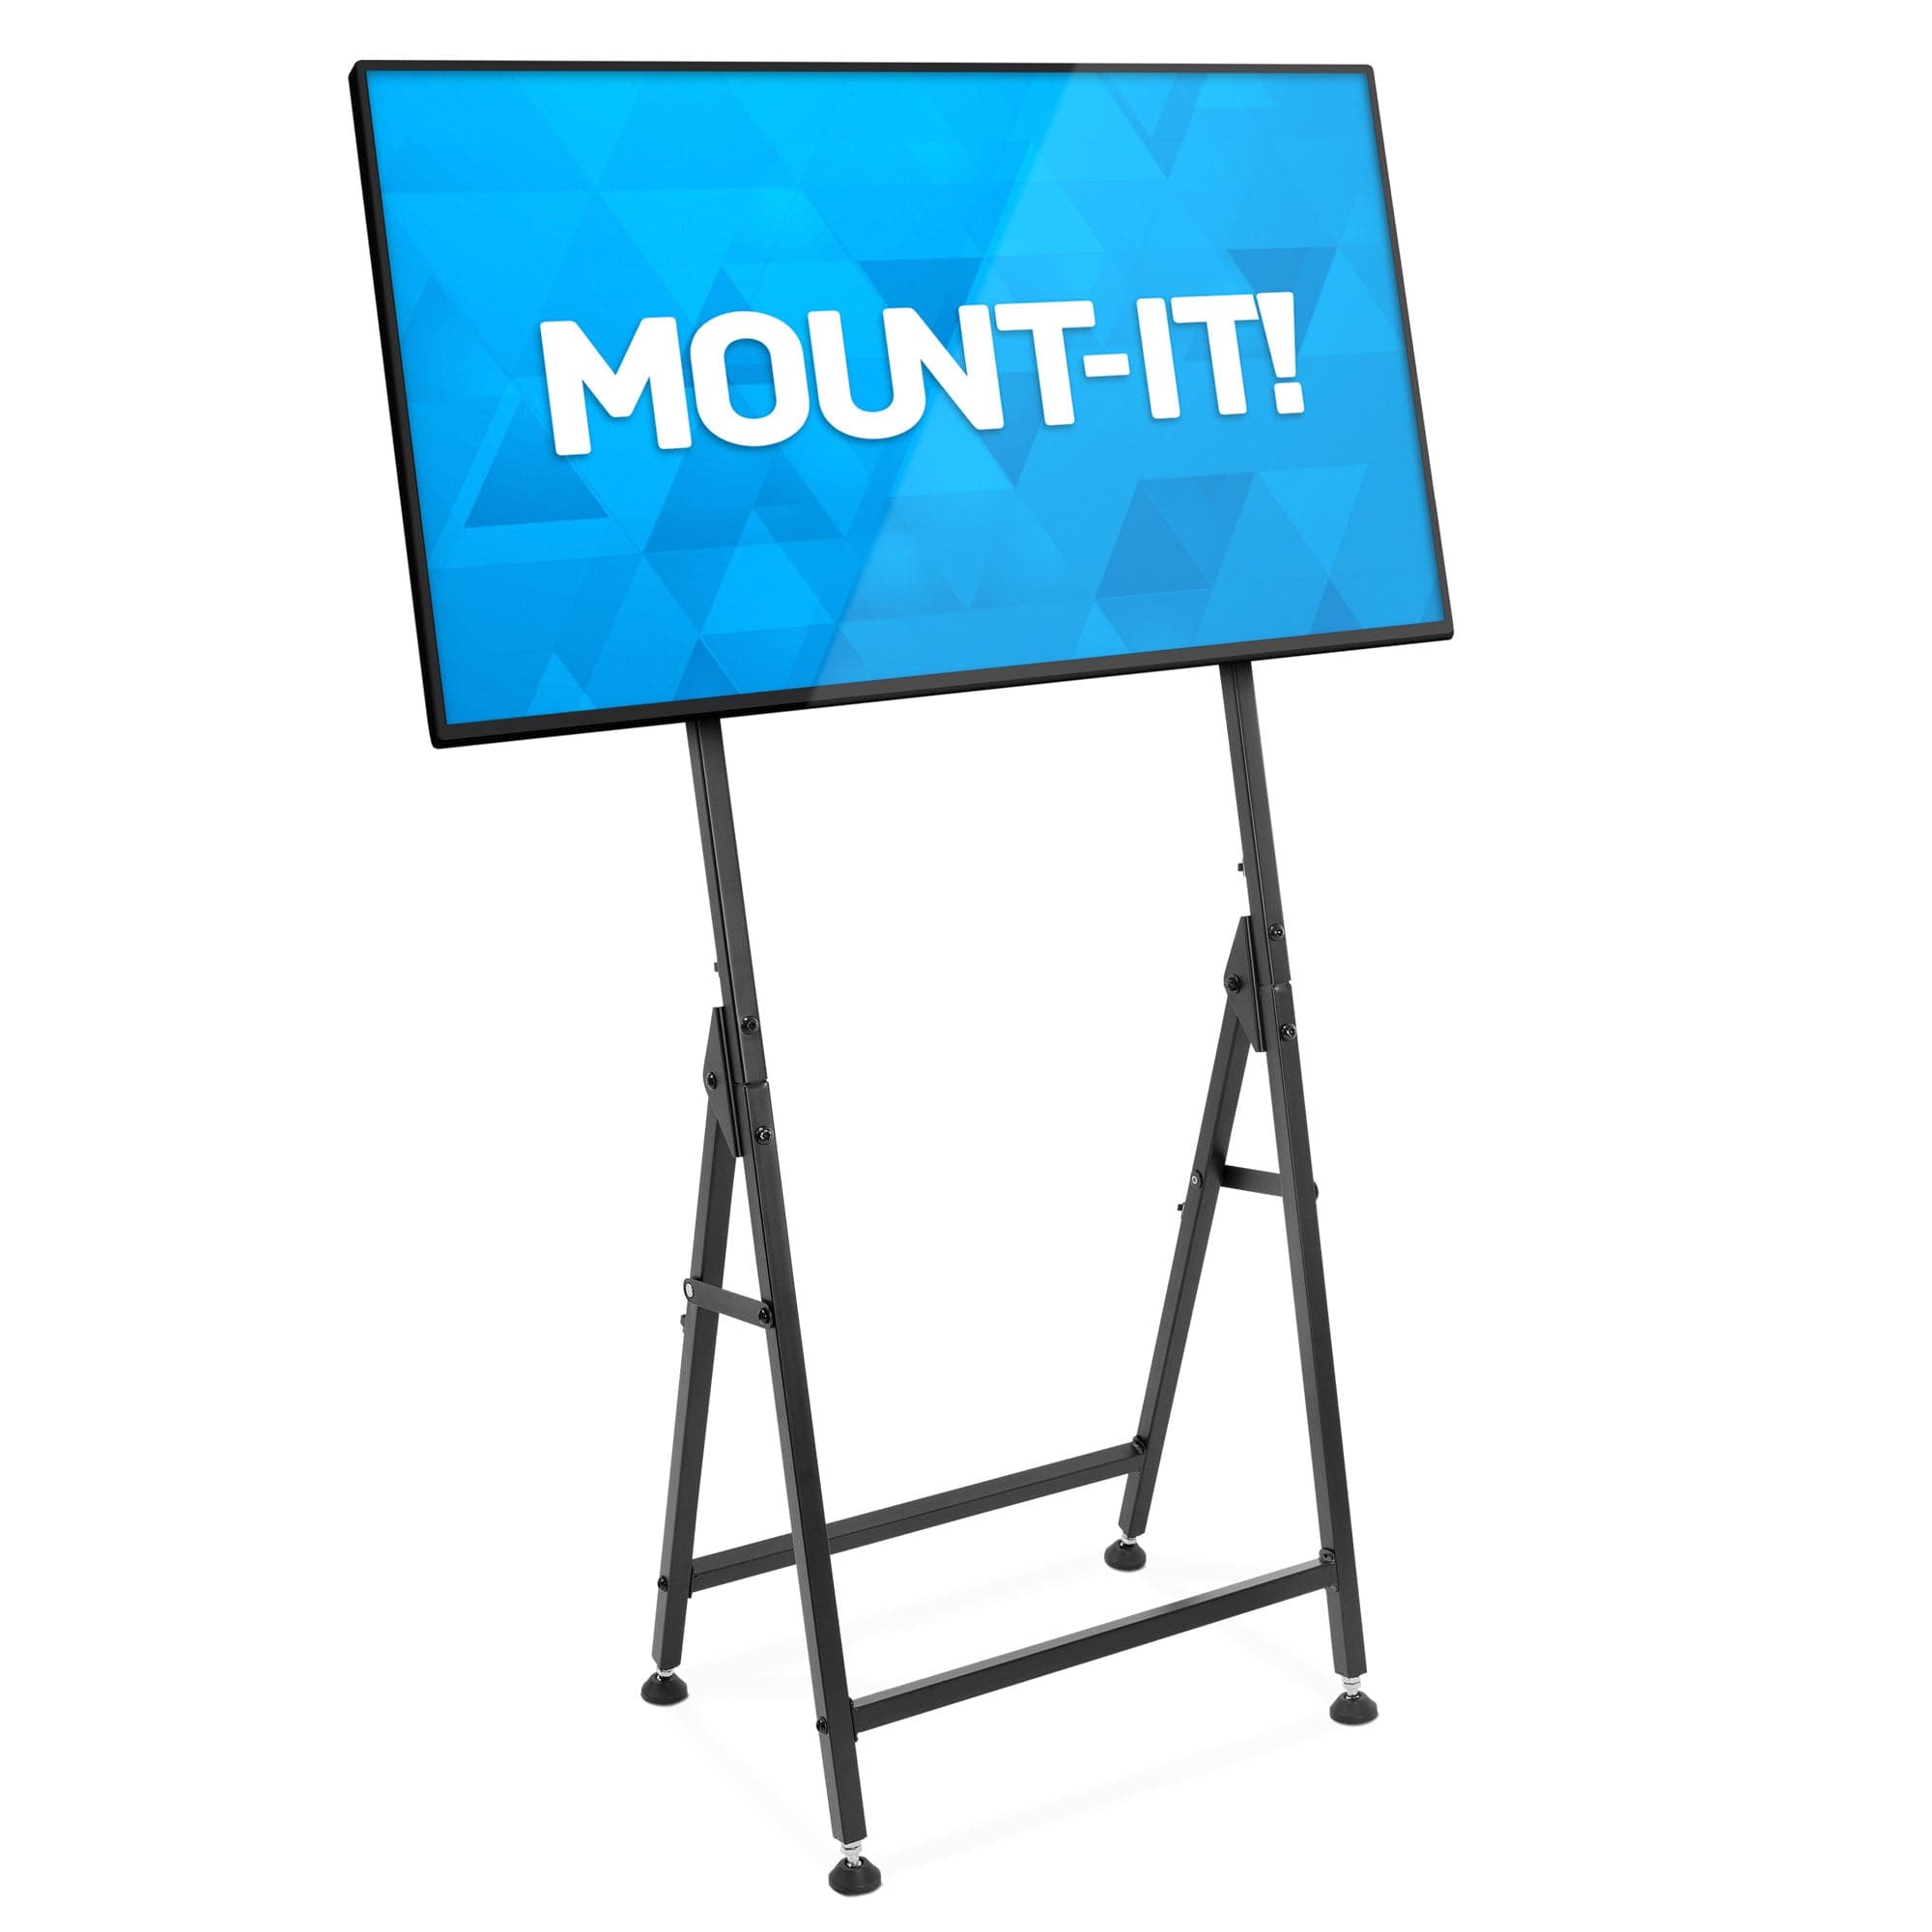 Portable TV Display Stand - Mount-It!